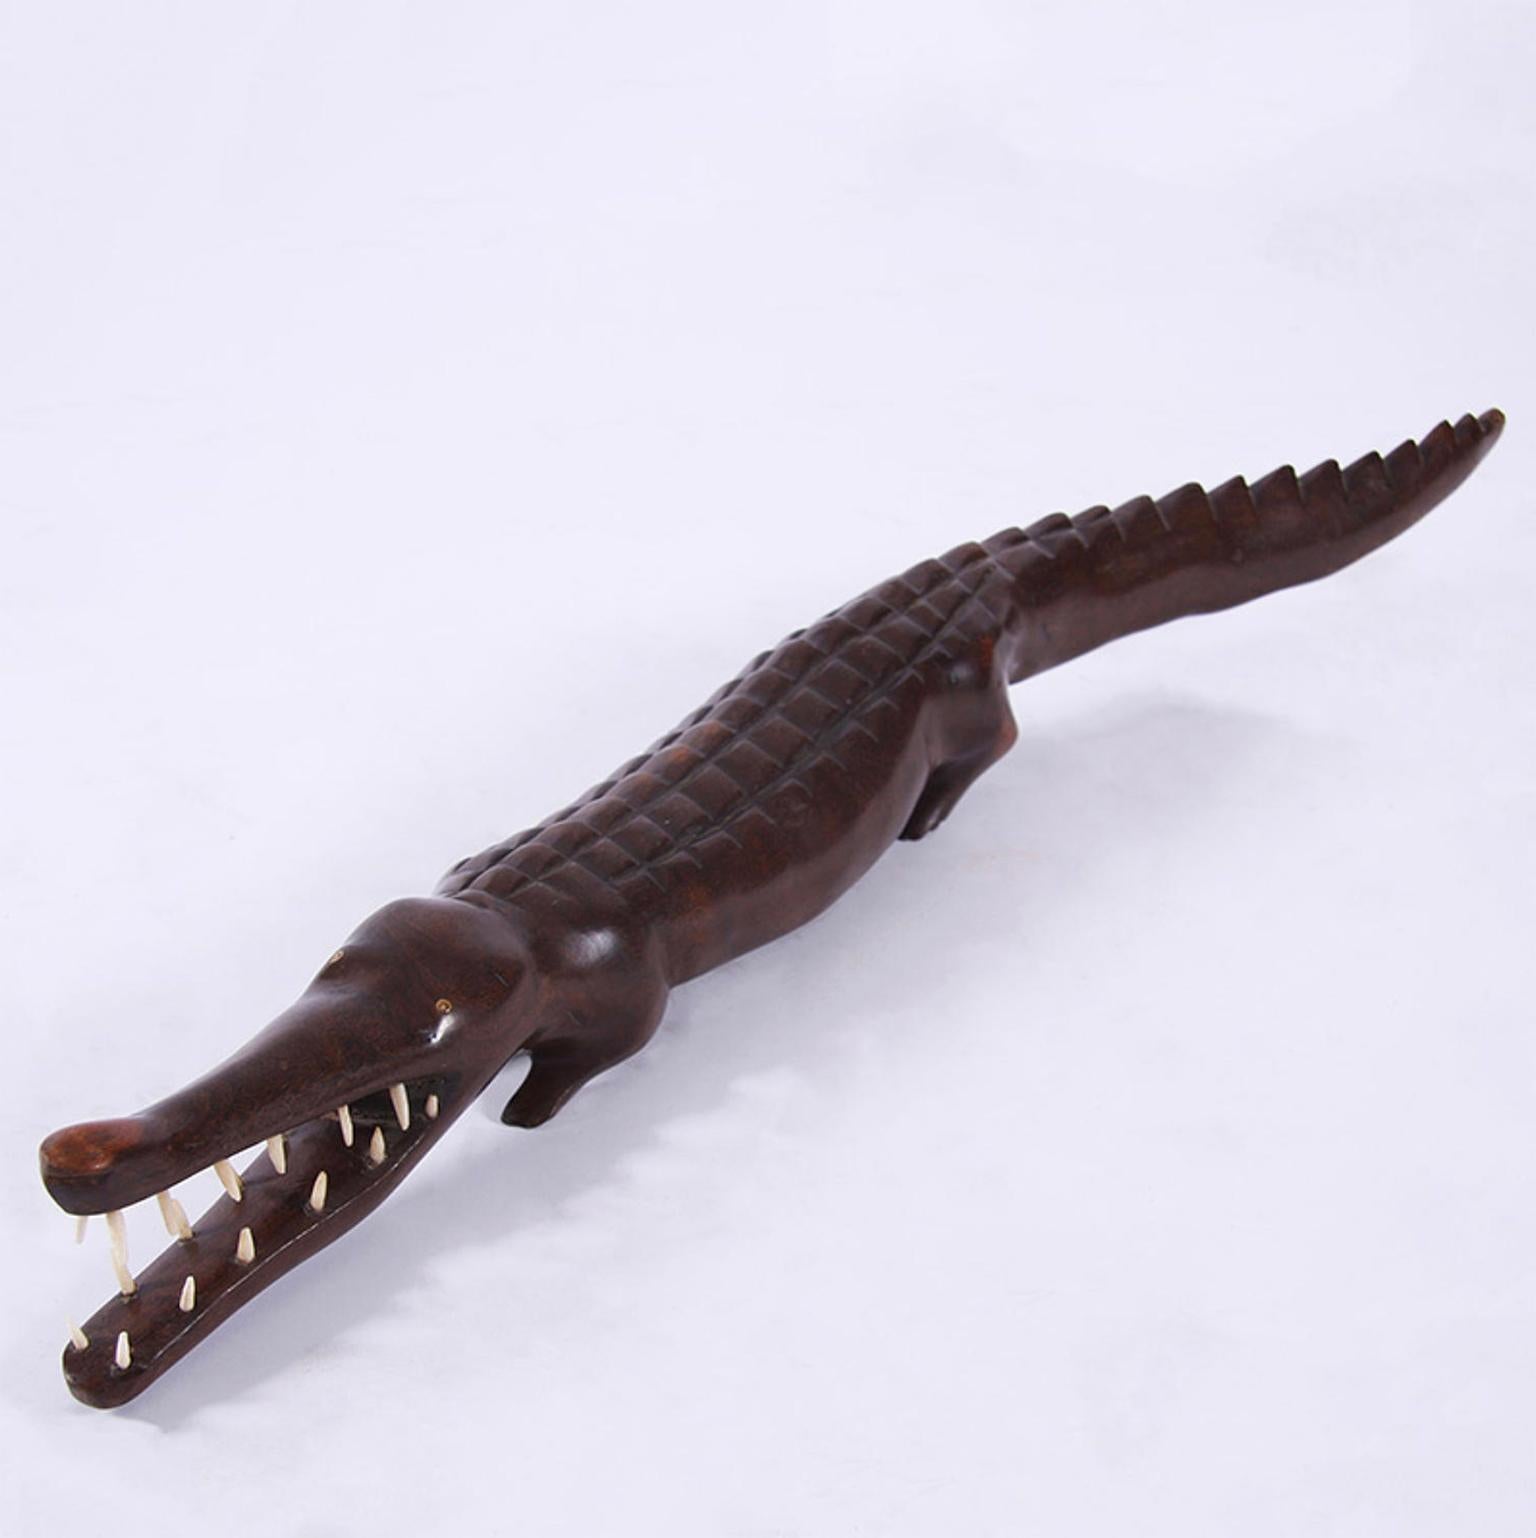 A super sweet wooden crocodile with mouth wide open to reveal teeth.